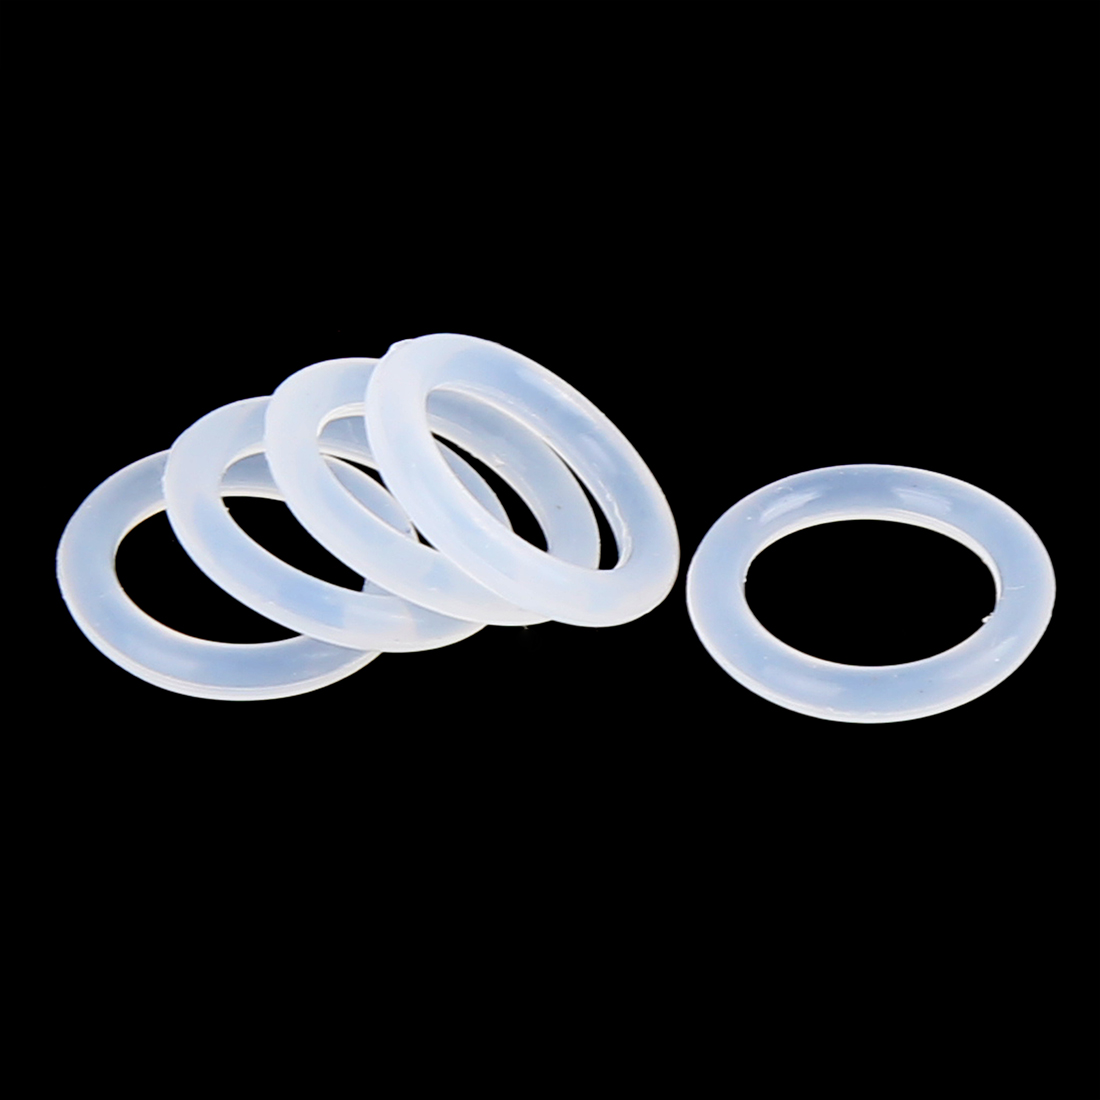 Unique Bargains 100Pcs Silicone O-Rings, 10mm OD, 7mm ID, 1.5mm Width, Seal Gasket White